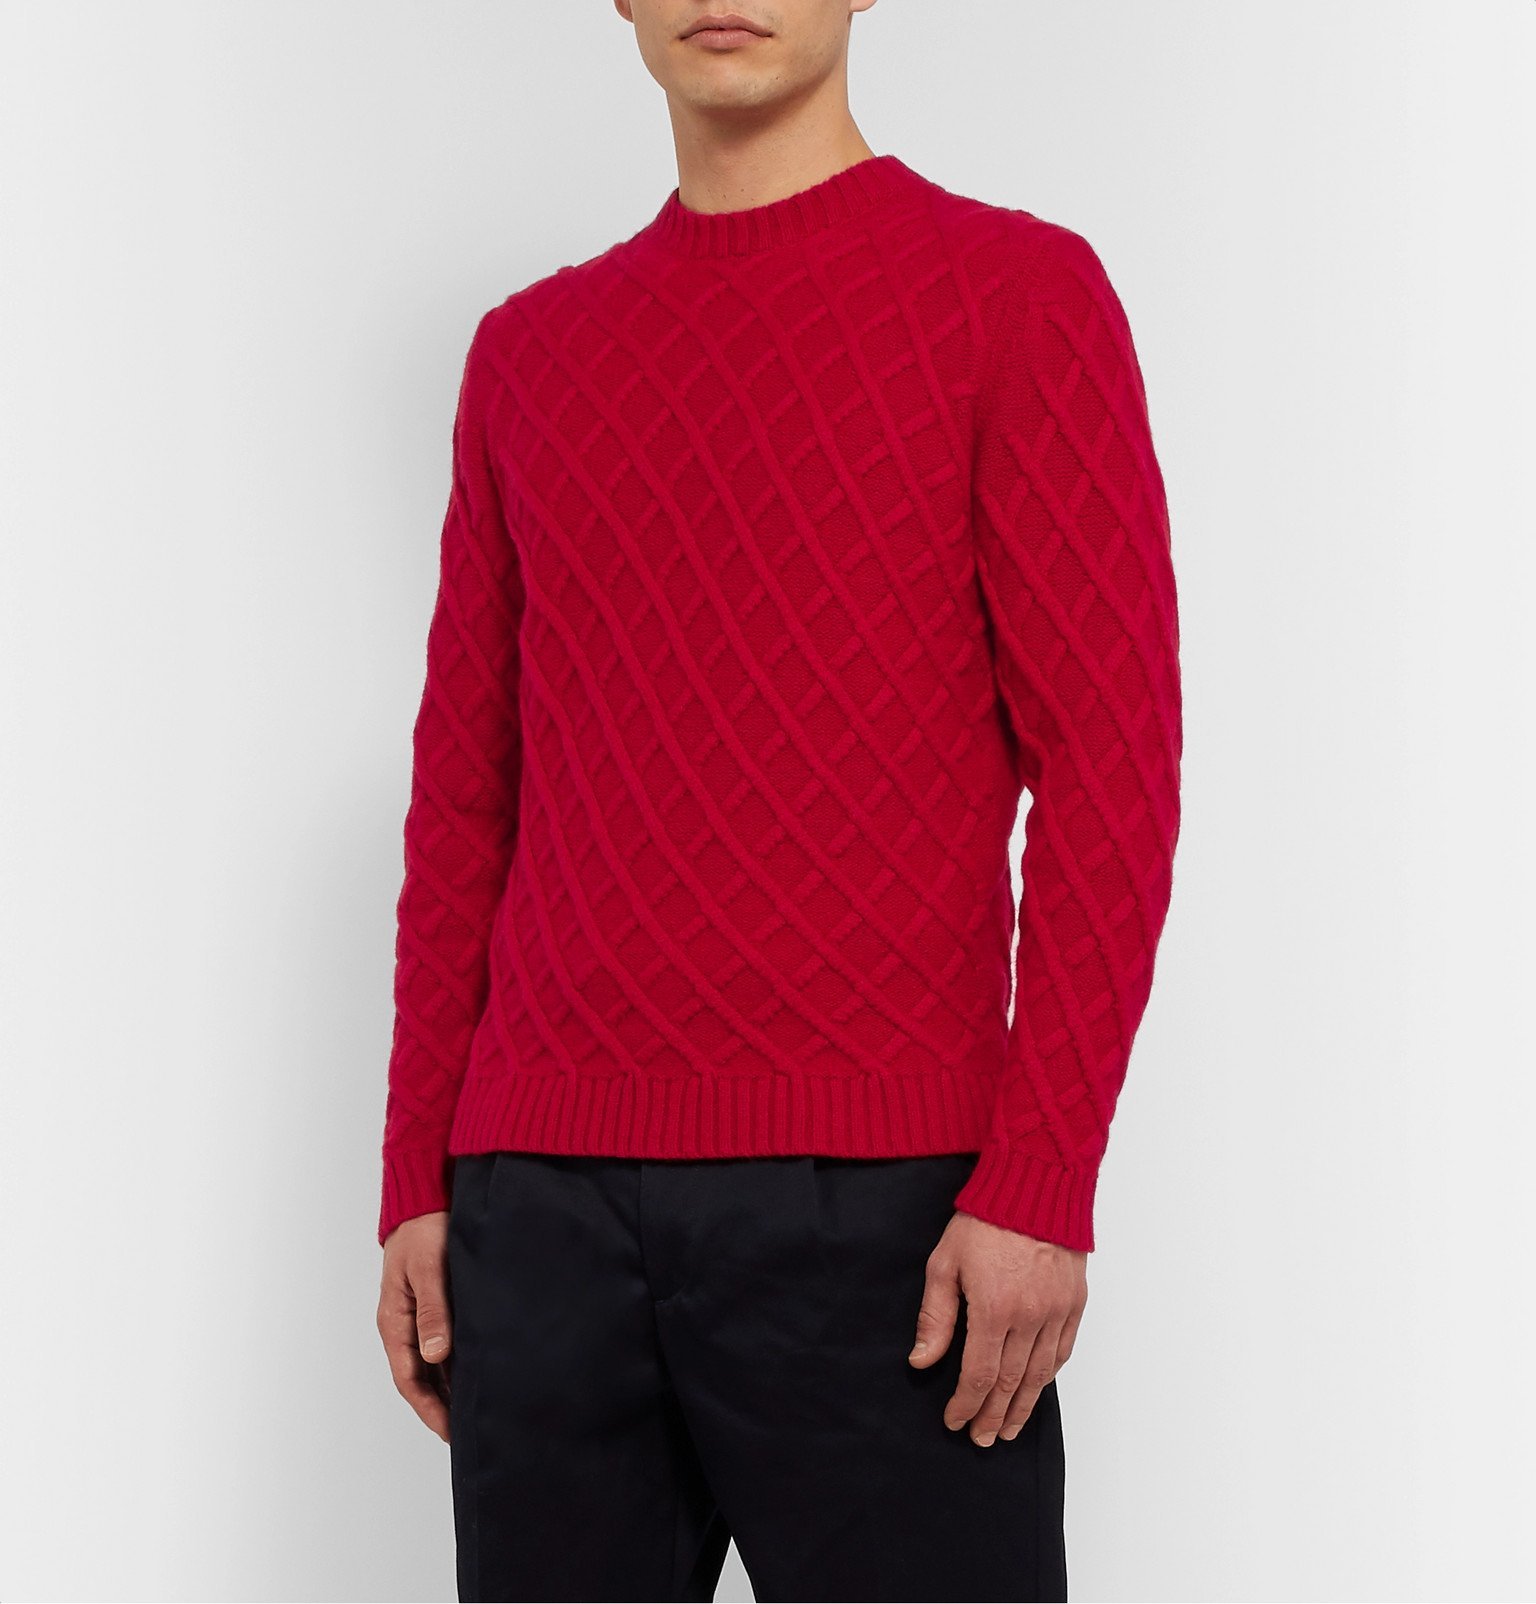 Dunhill - Slim-Fit Cable-Knit Cashmere Sweater - Red Dunhill